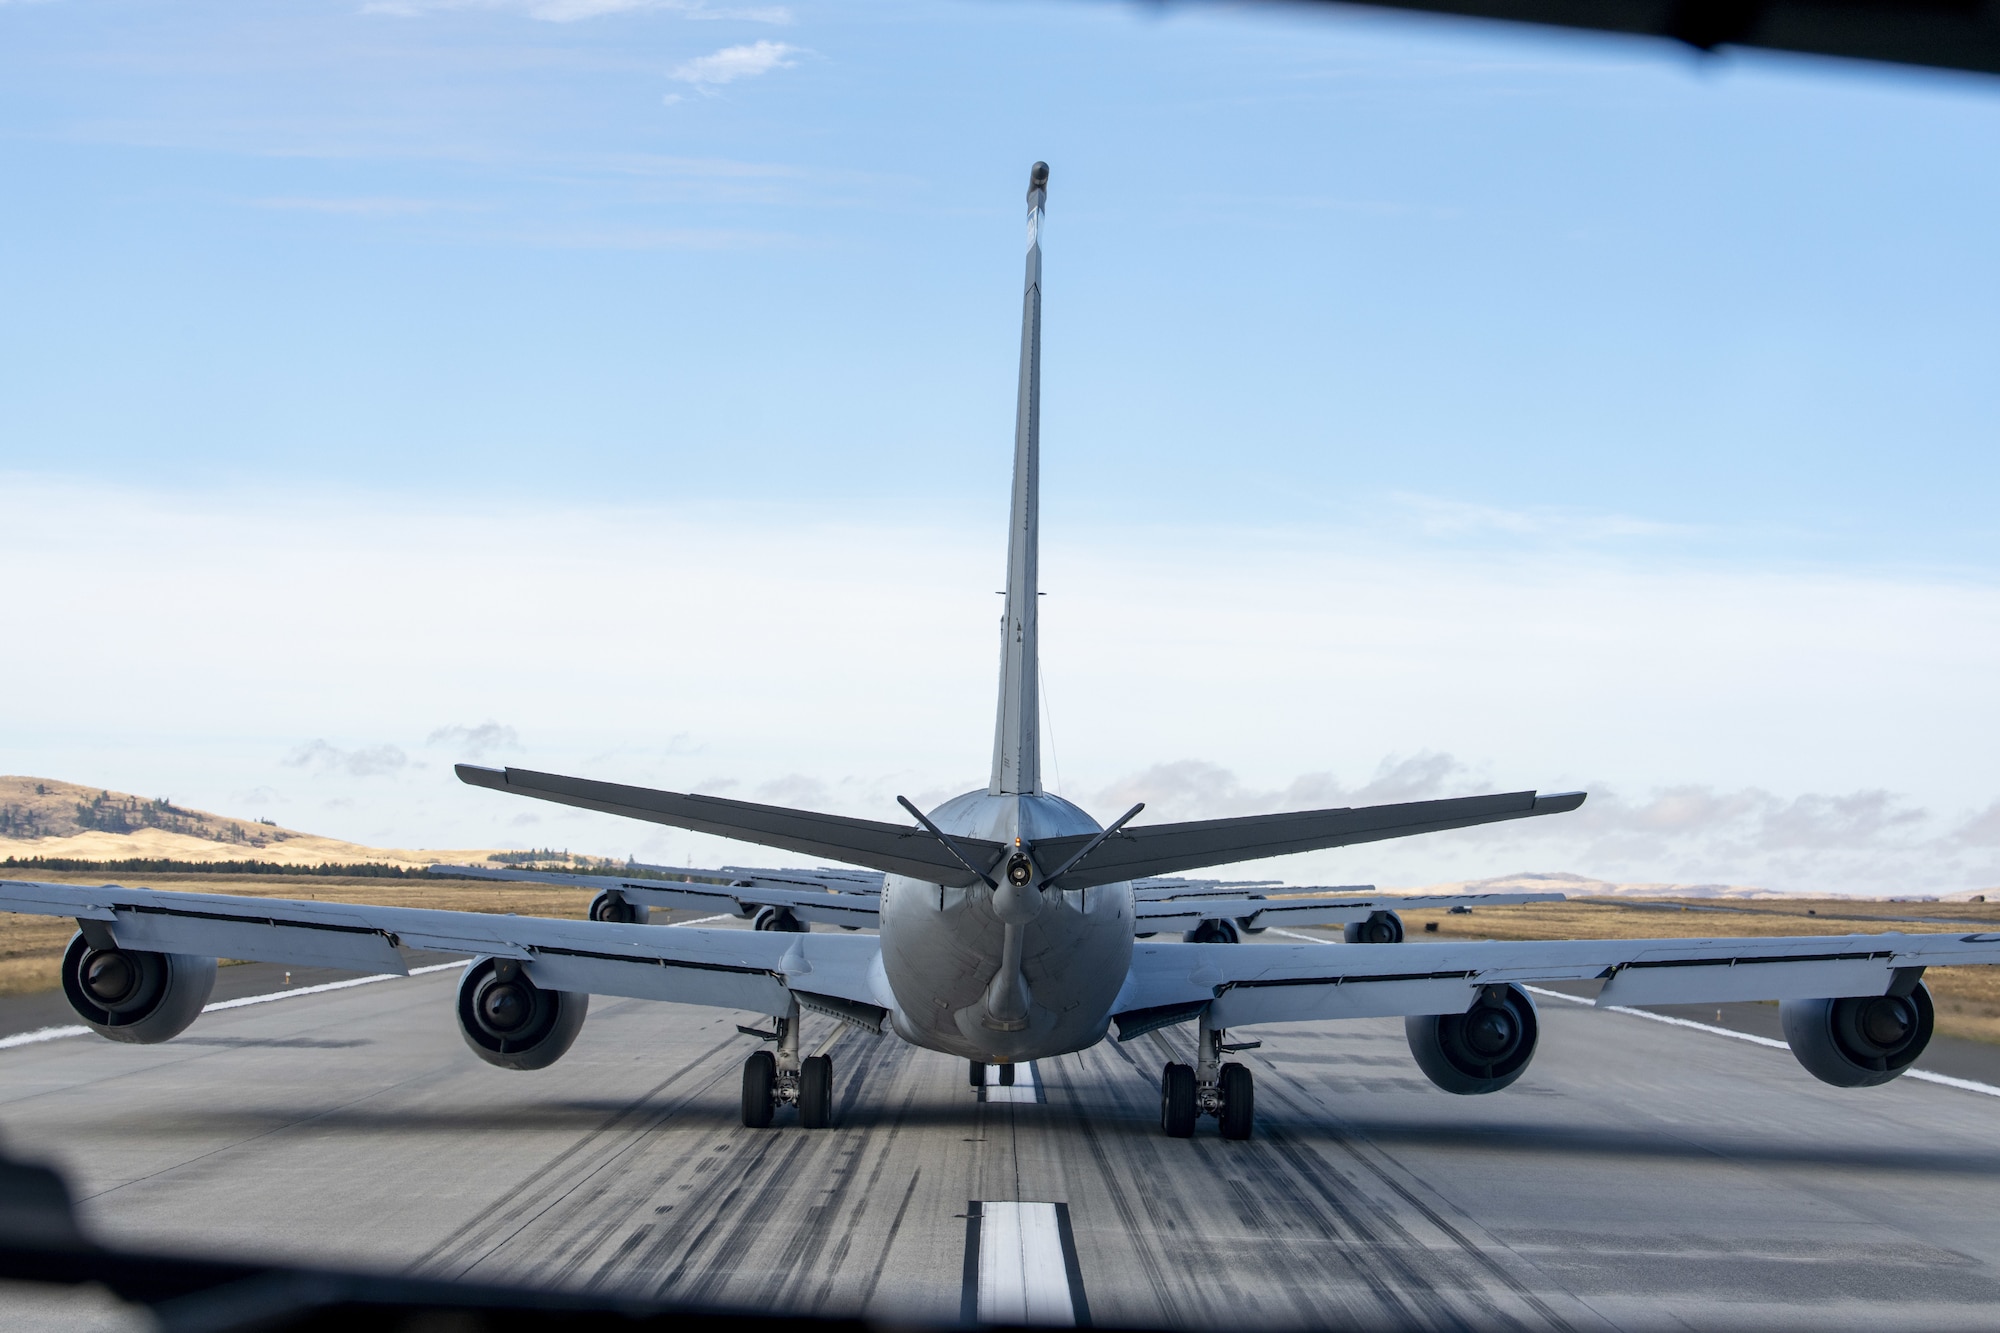 Multiple KC-135 Stratotankers perform an elephant walk as part of a 20-aircraft minimal interval takeoff exercise at Fairchild Air Force Base, Washington, Sept. 29, 2021.